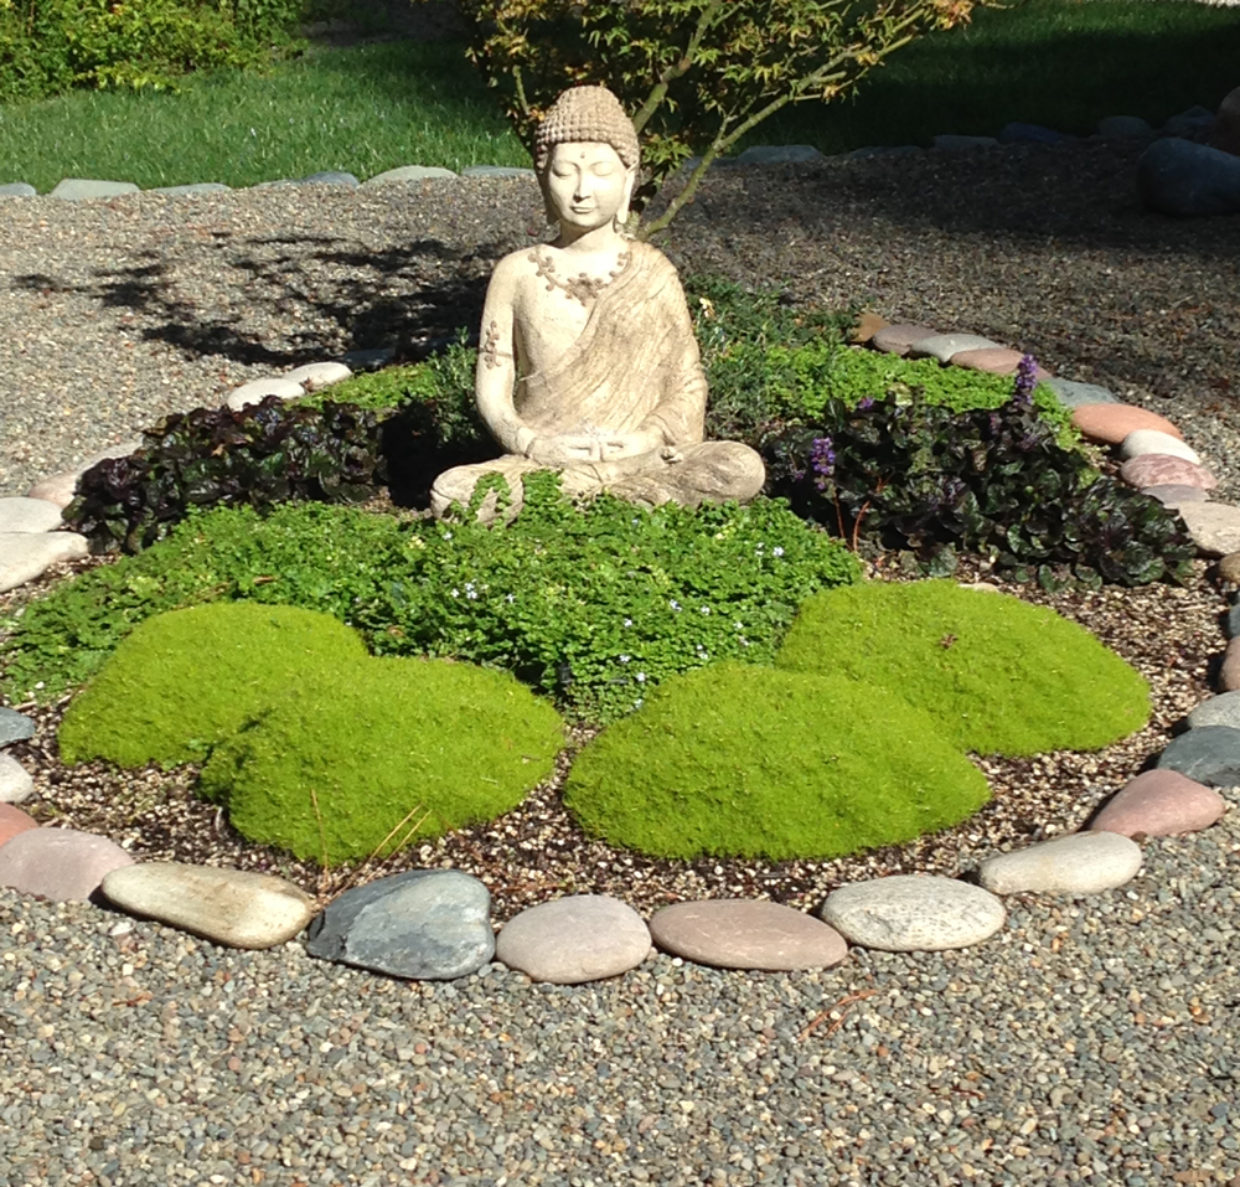 Bring tranquility to the landscape by building your own Zen rock garden